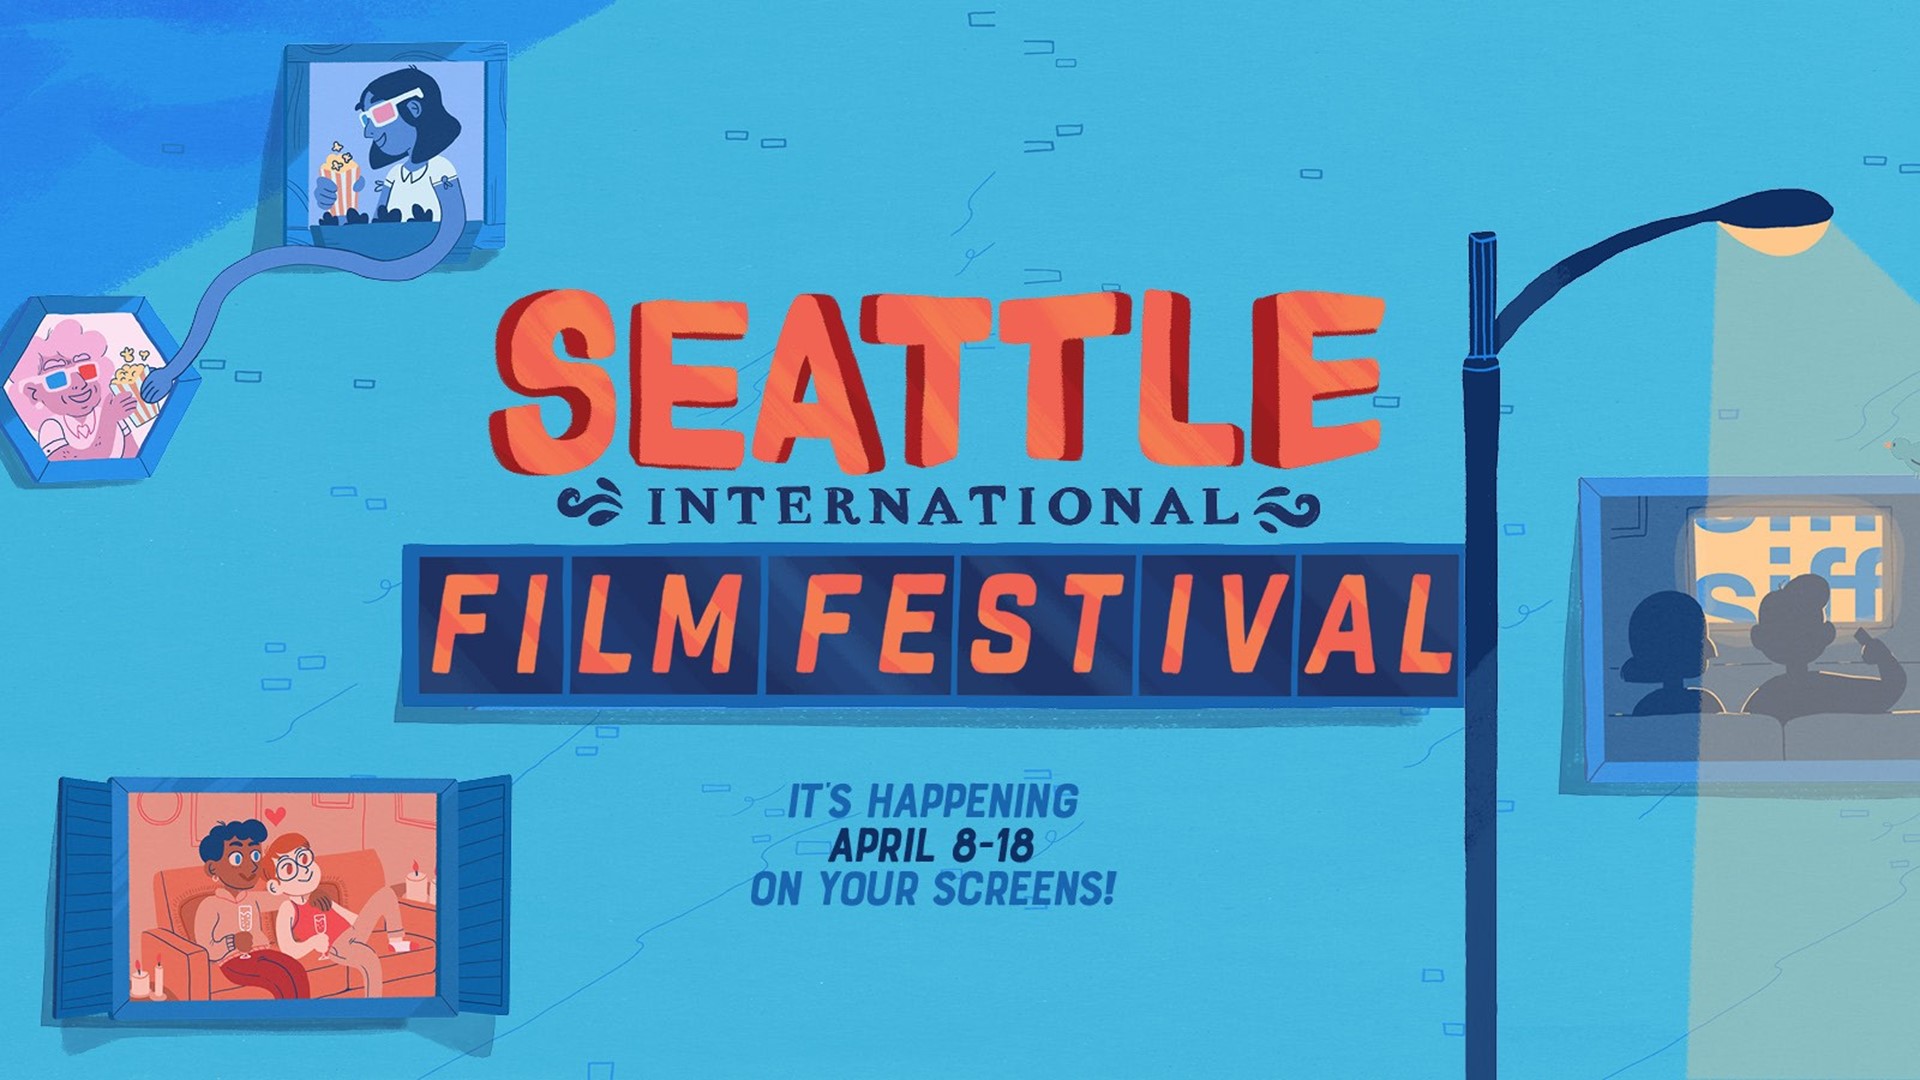 The Seattle International Film Festival goes virtual for its 47th year